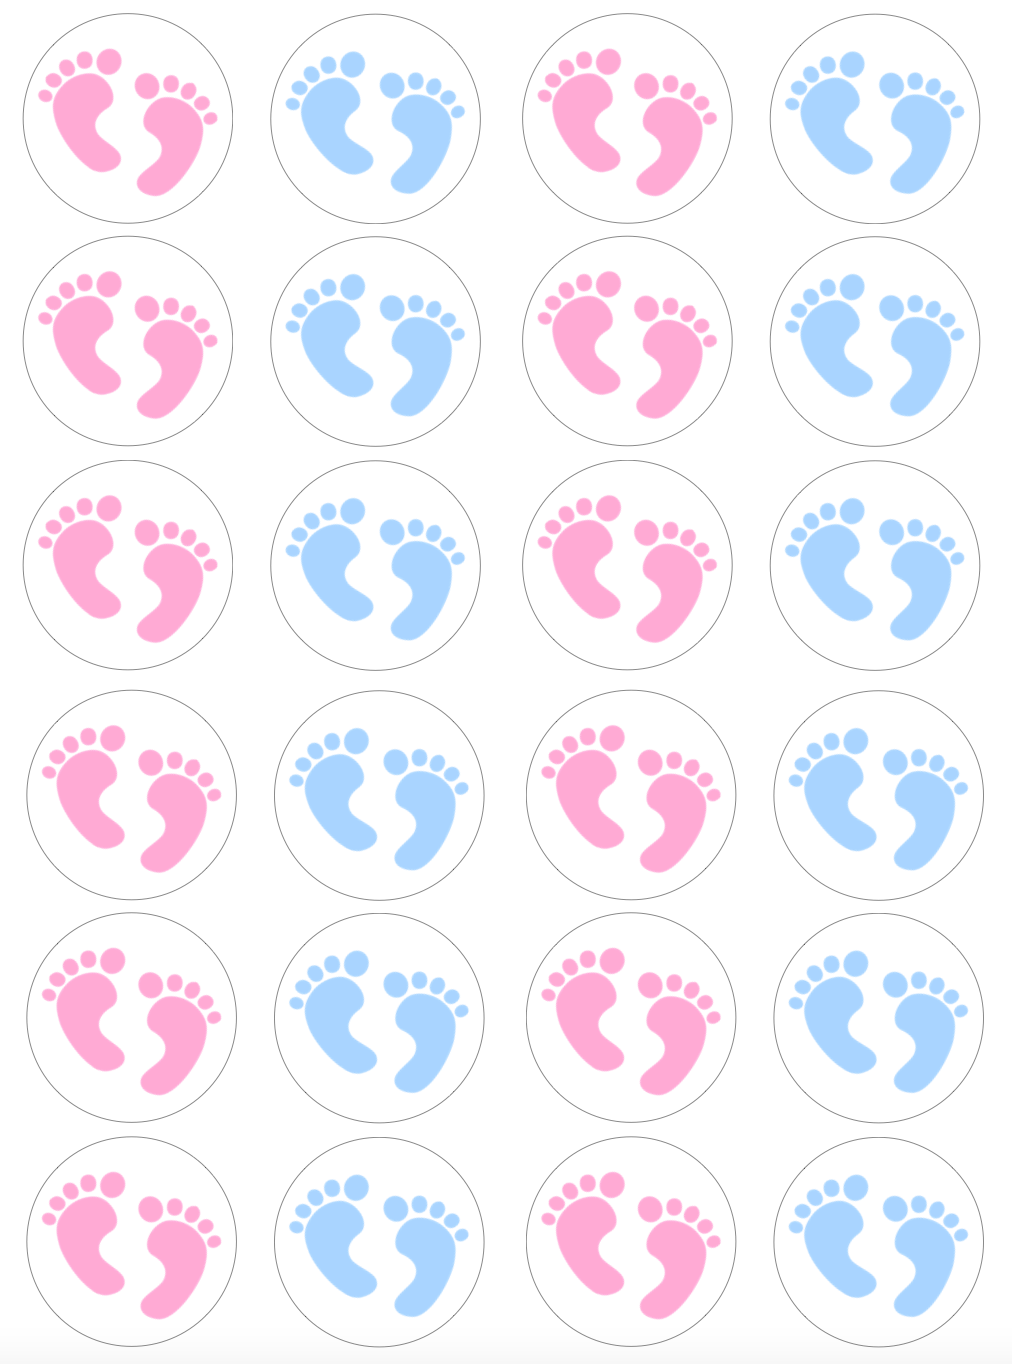 Baby Shower Feet Cupcake Edible Icing Image Toppers